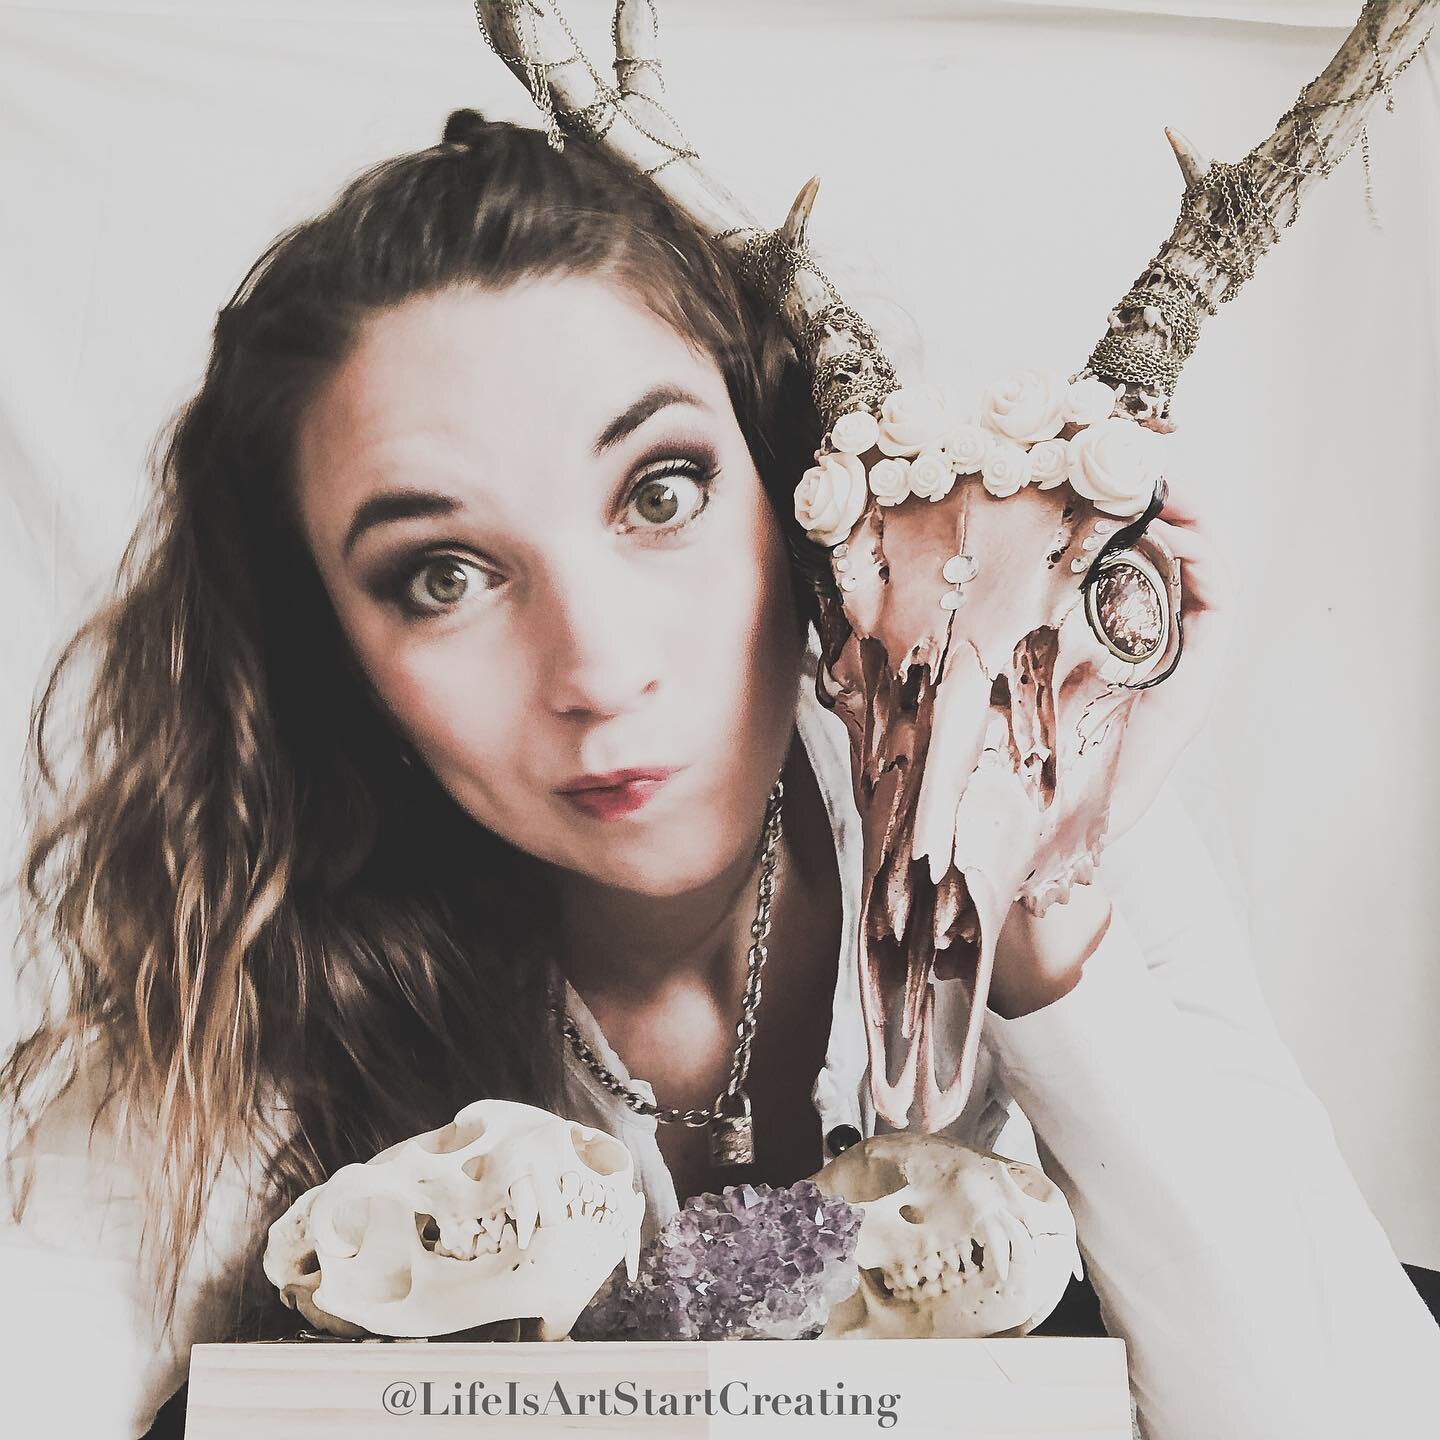 Originality #beoriginal &ldquo;Every human being is intended to have a character of his own; to be what no other is, and to do what no other can do.&rdquo; -Channing
#createyourlife #bonecollector #oddities #skulls #northdakotalife